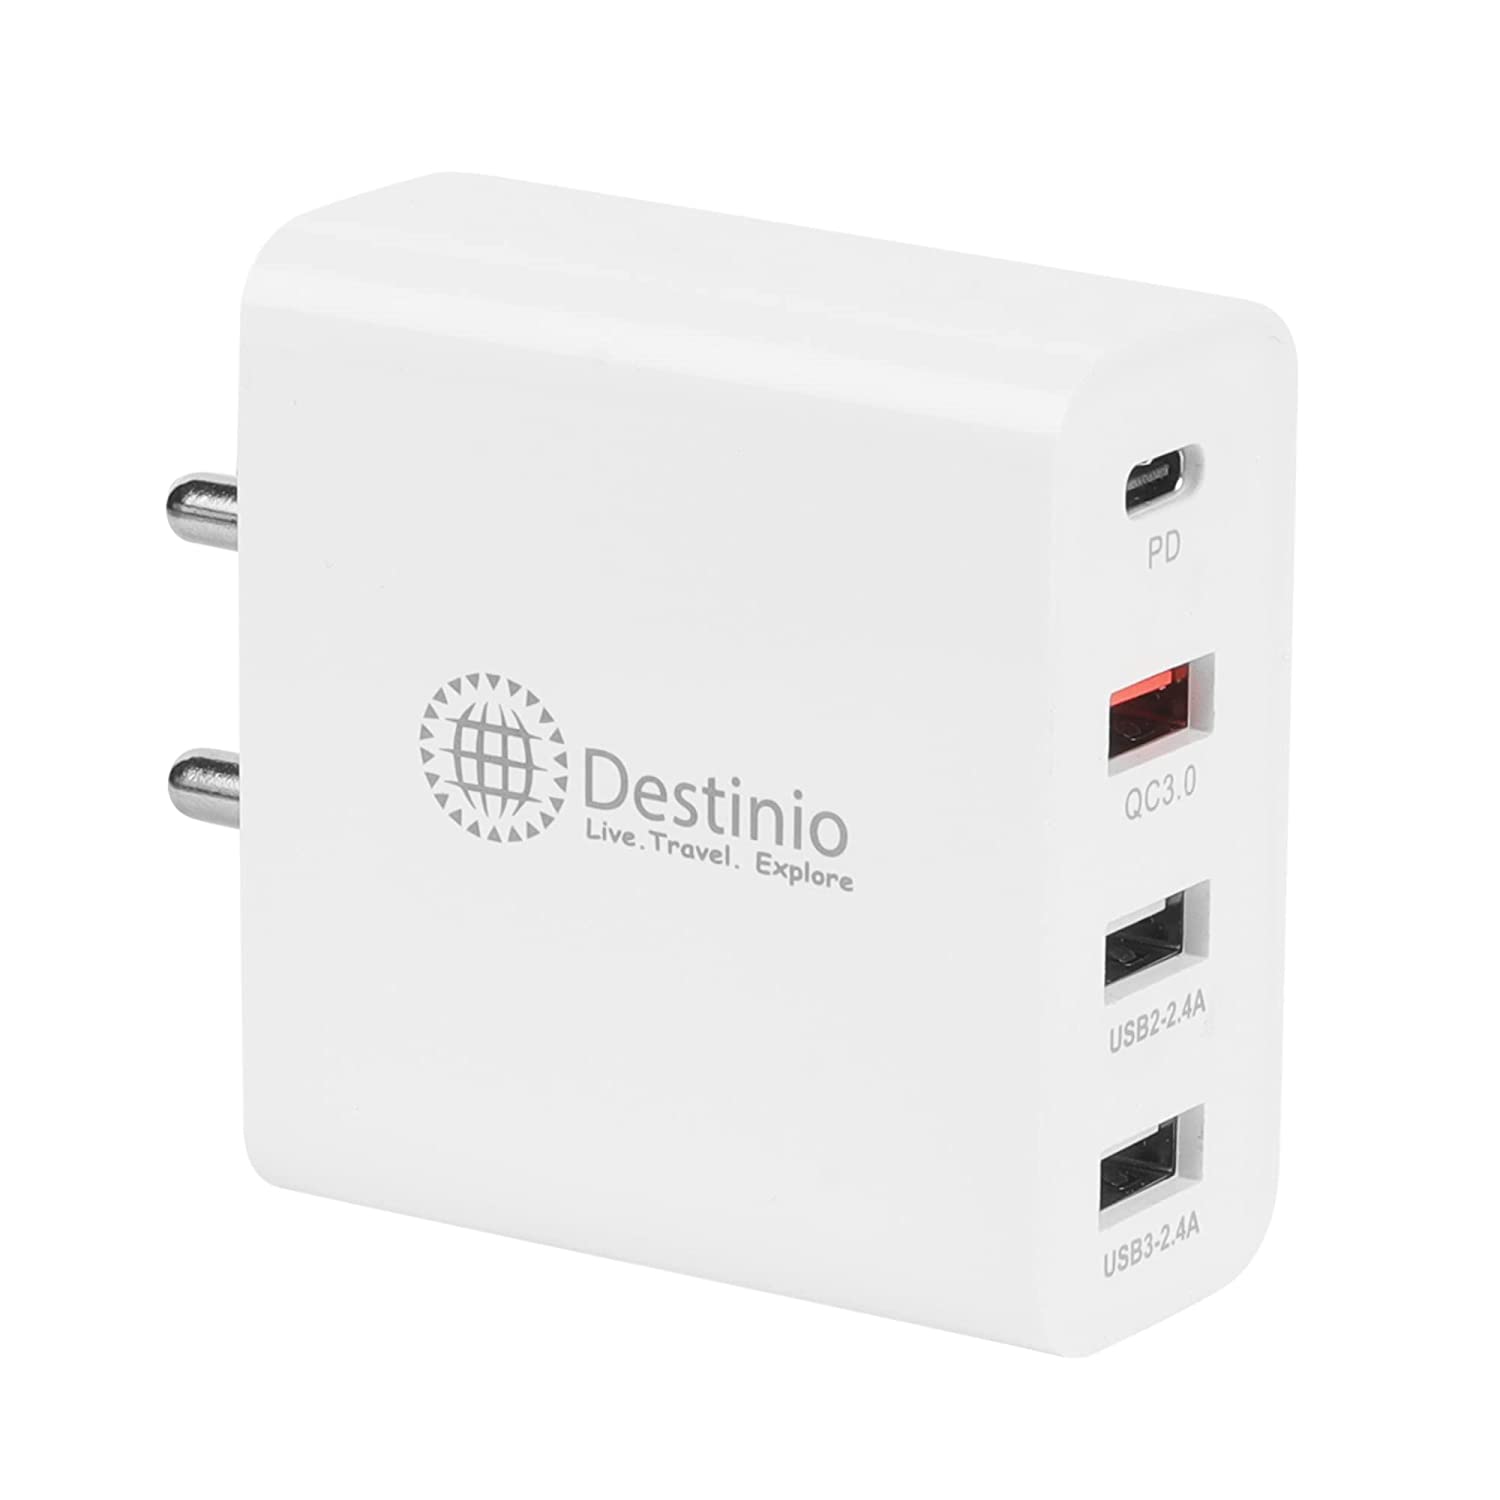 Destinio Multi USB Travel Charger Adapter, 4 USB Slots with 18W PD Fast Charging